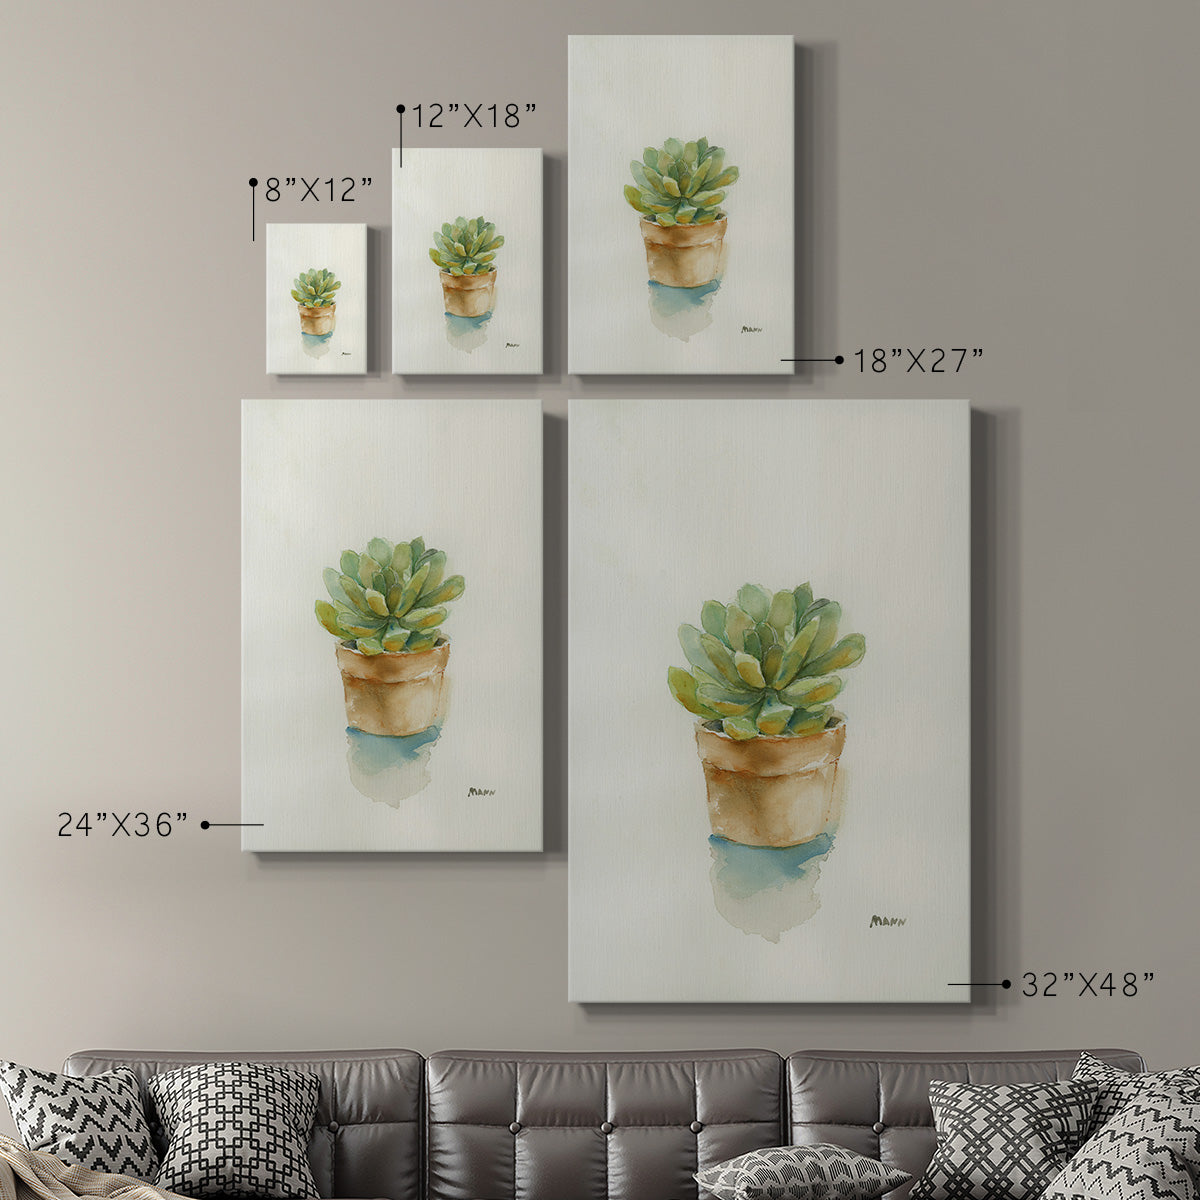 Succulent II Premium Gallery Wrapped Canvas - Ready to Hang